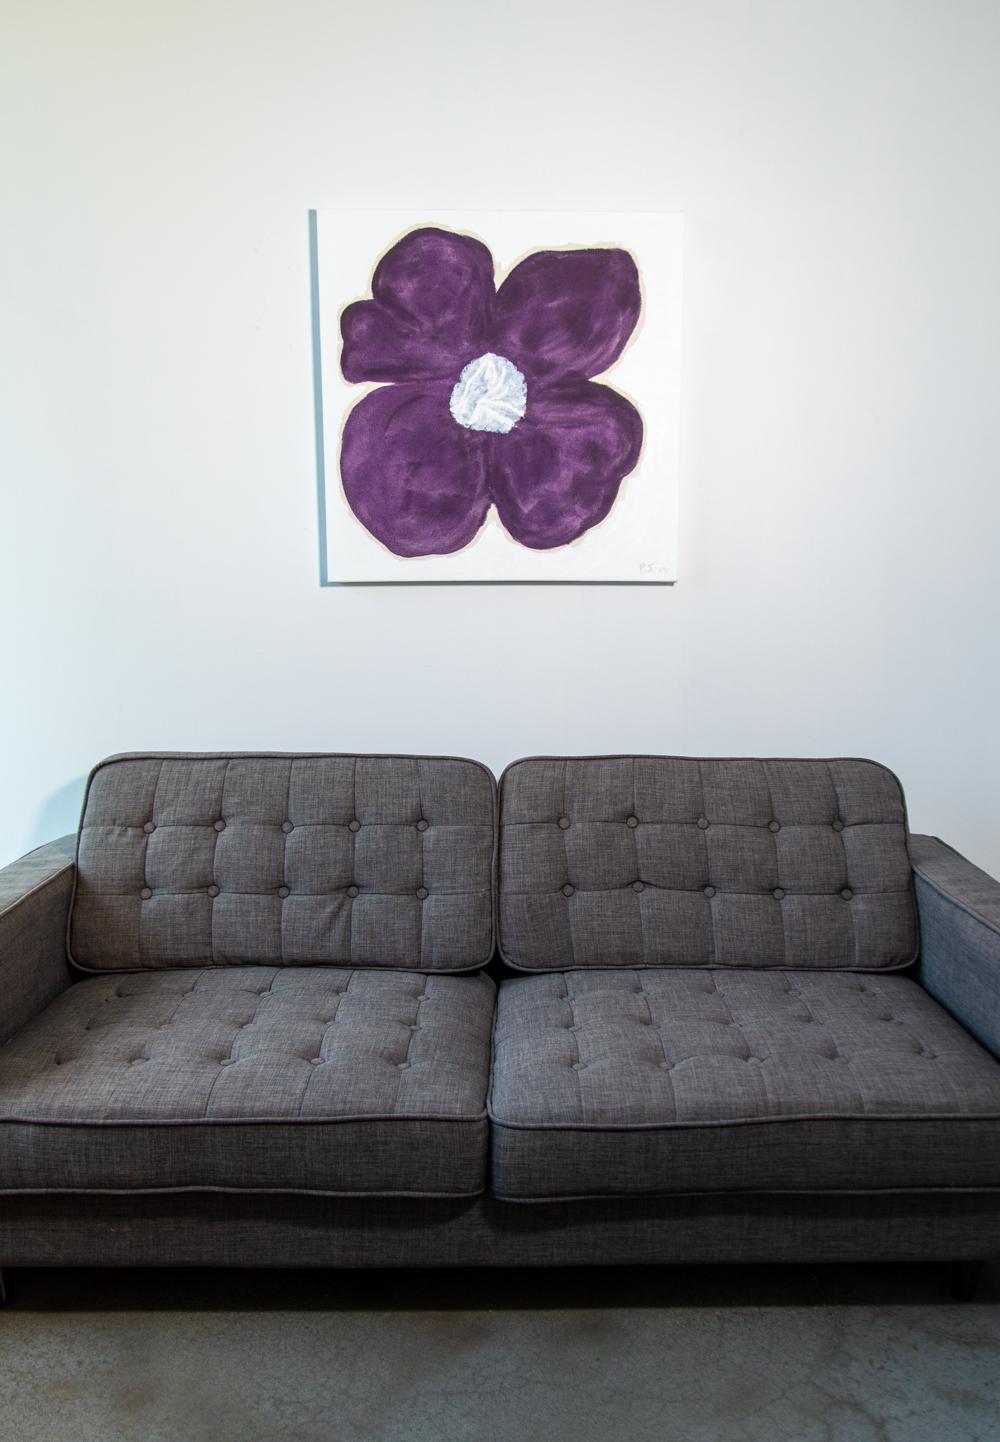 A rich dark purple pansy fills the canvas in this engaging abstract floral by Vancouver artist, Pat Service. The bright white pistil/center provides contrast. Reminiscent of Andy Warhol, Service’s flowers are pared down to the essentials--simple